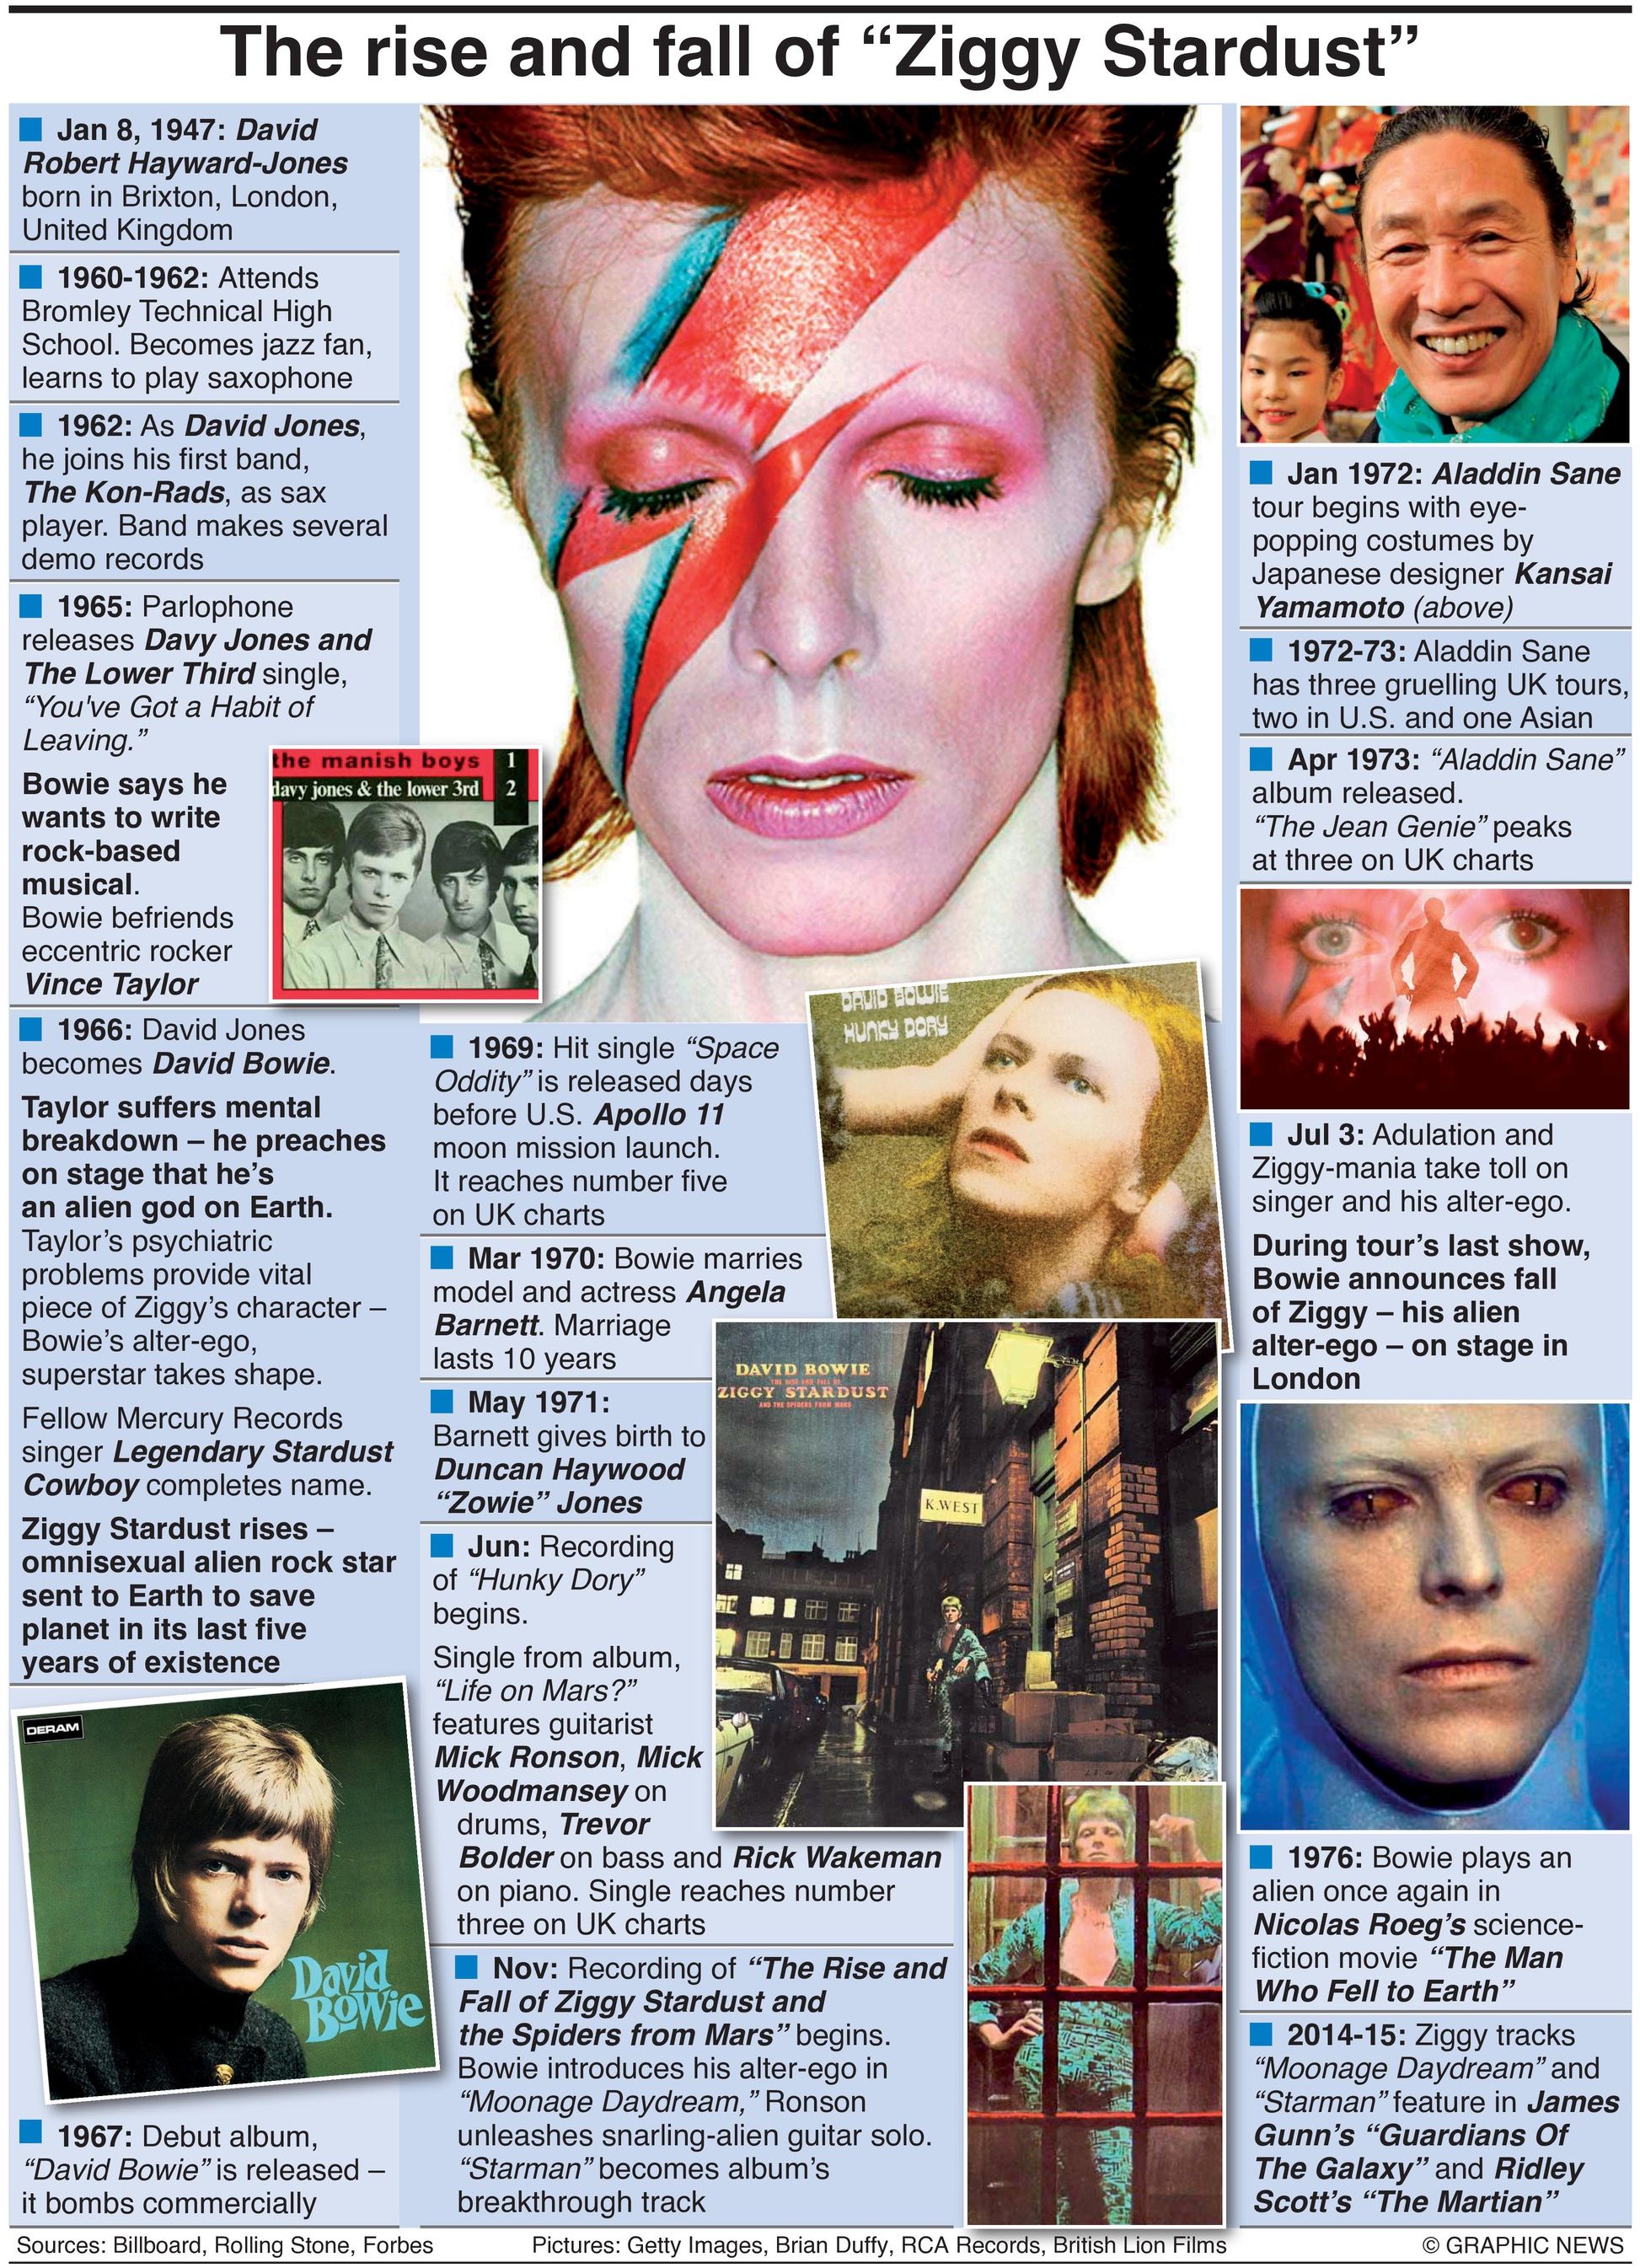 The Rise And Fall Of “Ziggy Stardust”